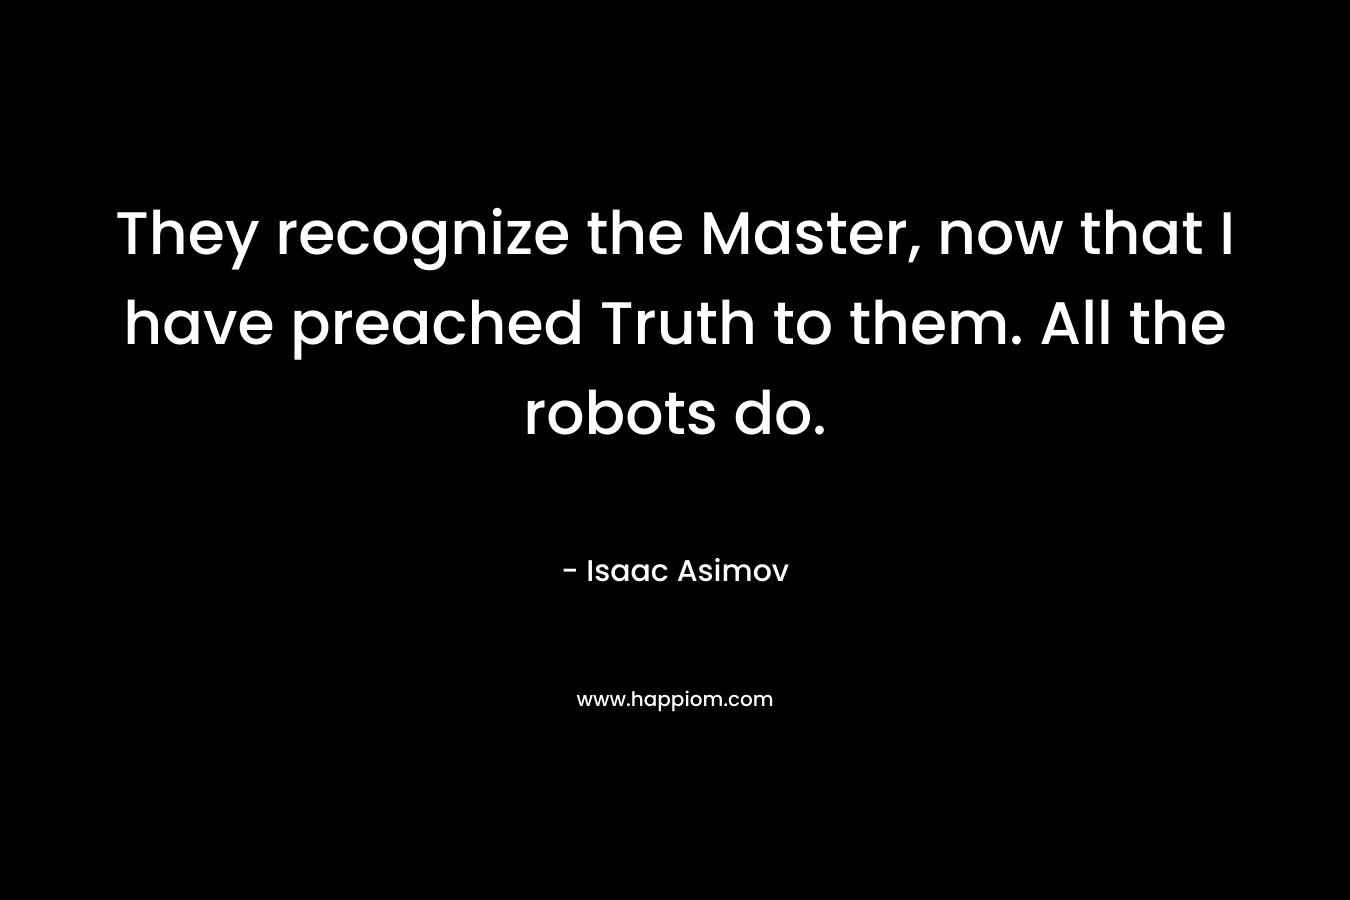 They recognize the Master, now that I have preached Truth to them. All the robots do. – Isaac Asimov